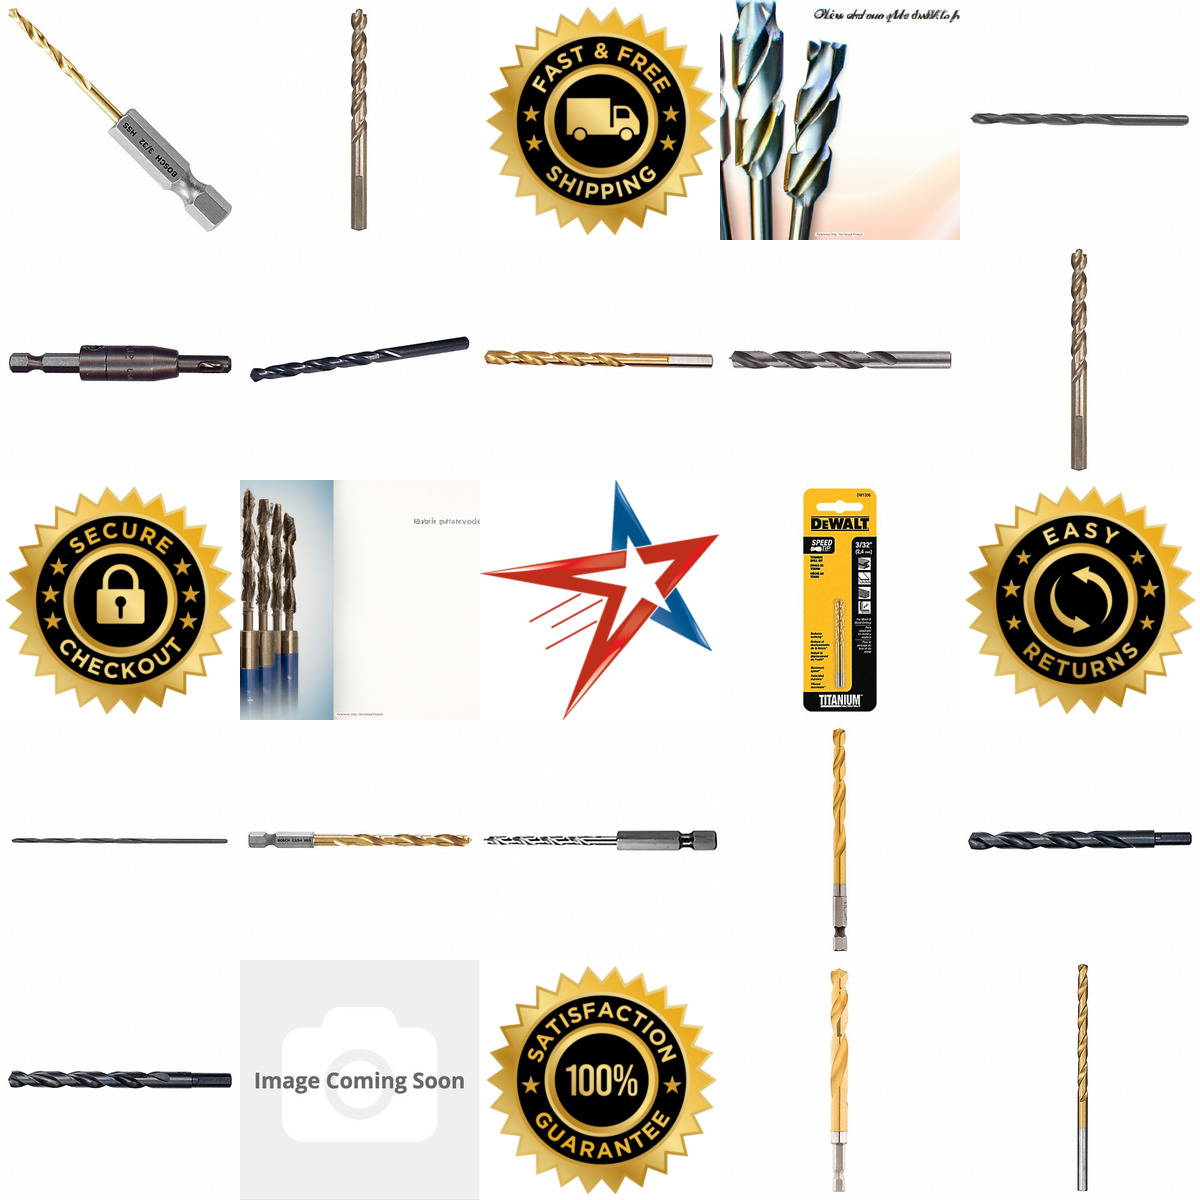 A selection of Hex Shank Drill Bits products on GoVets